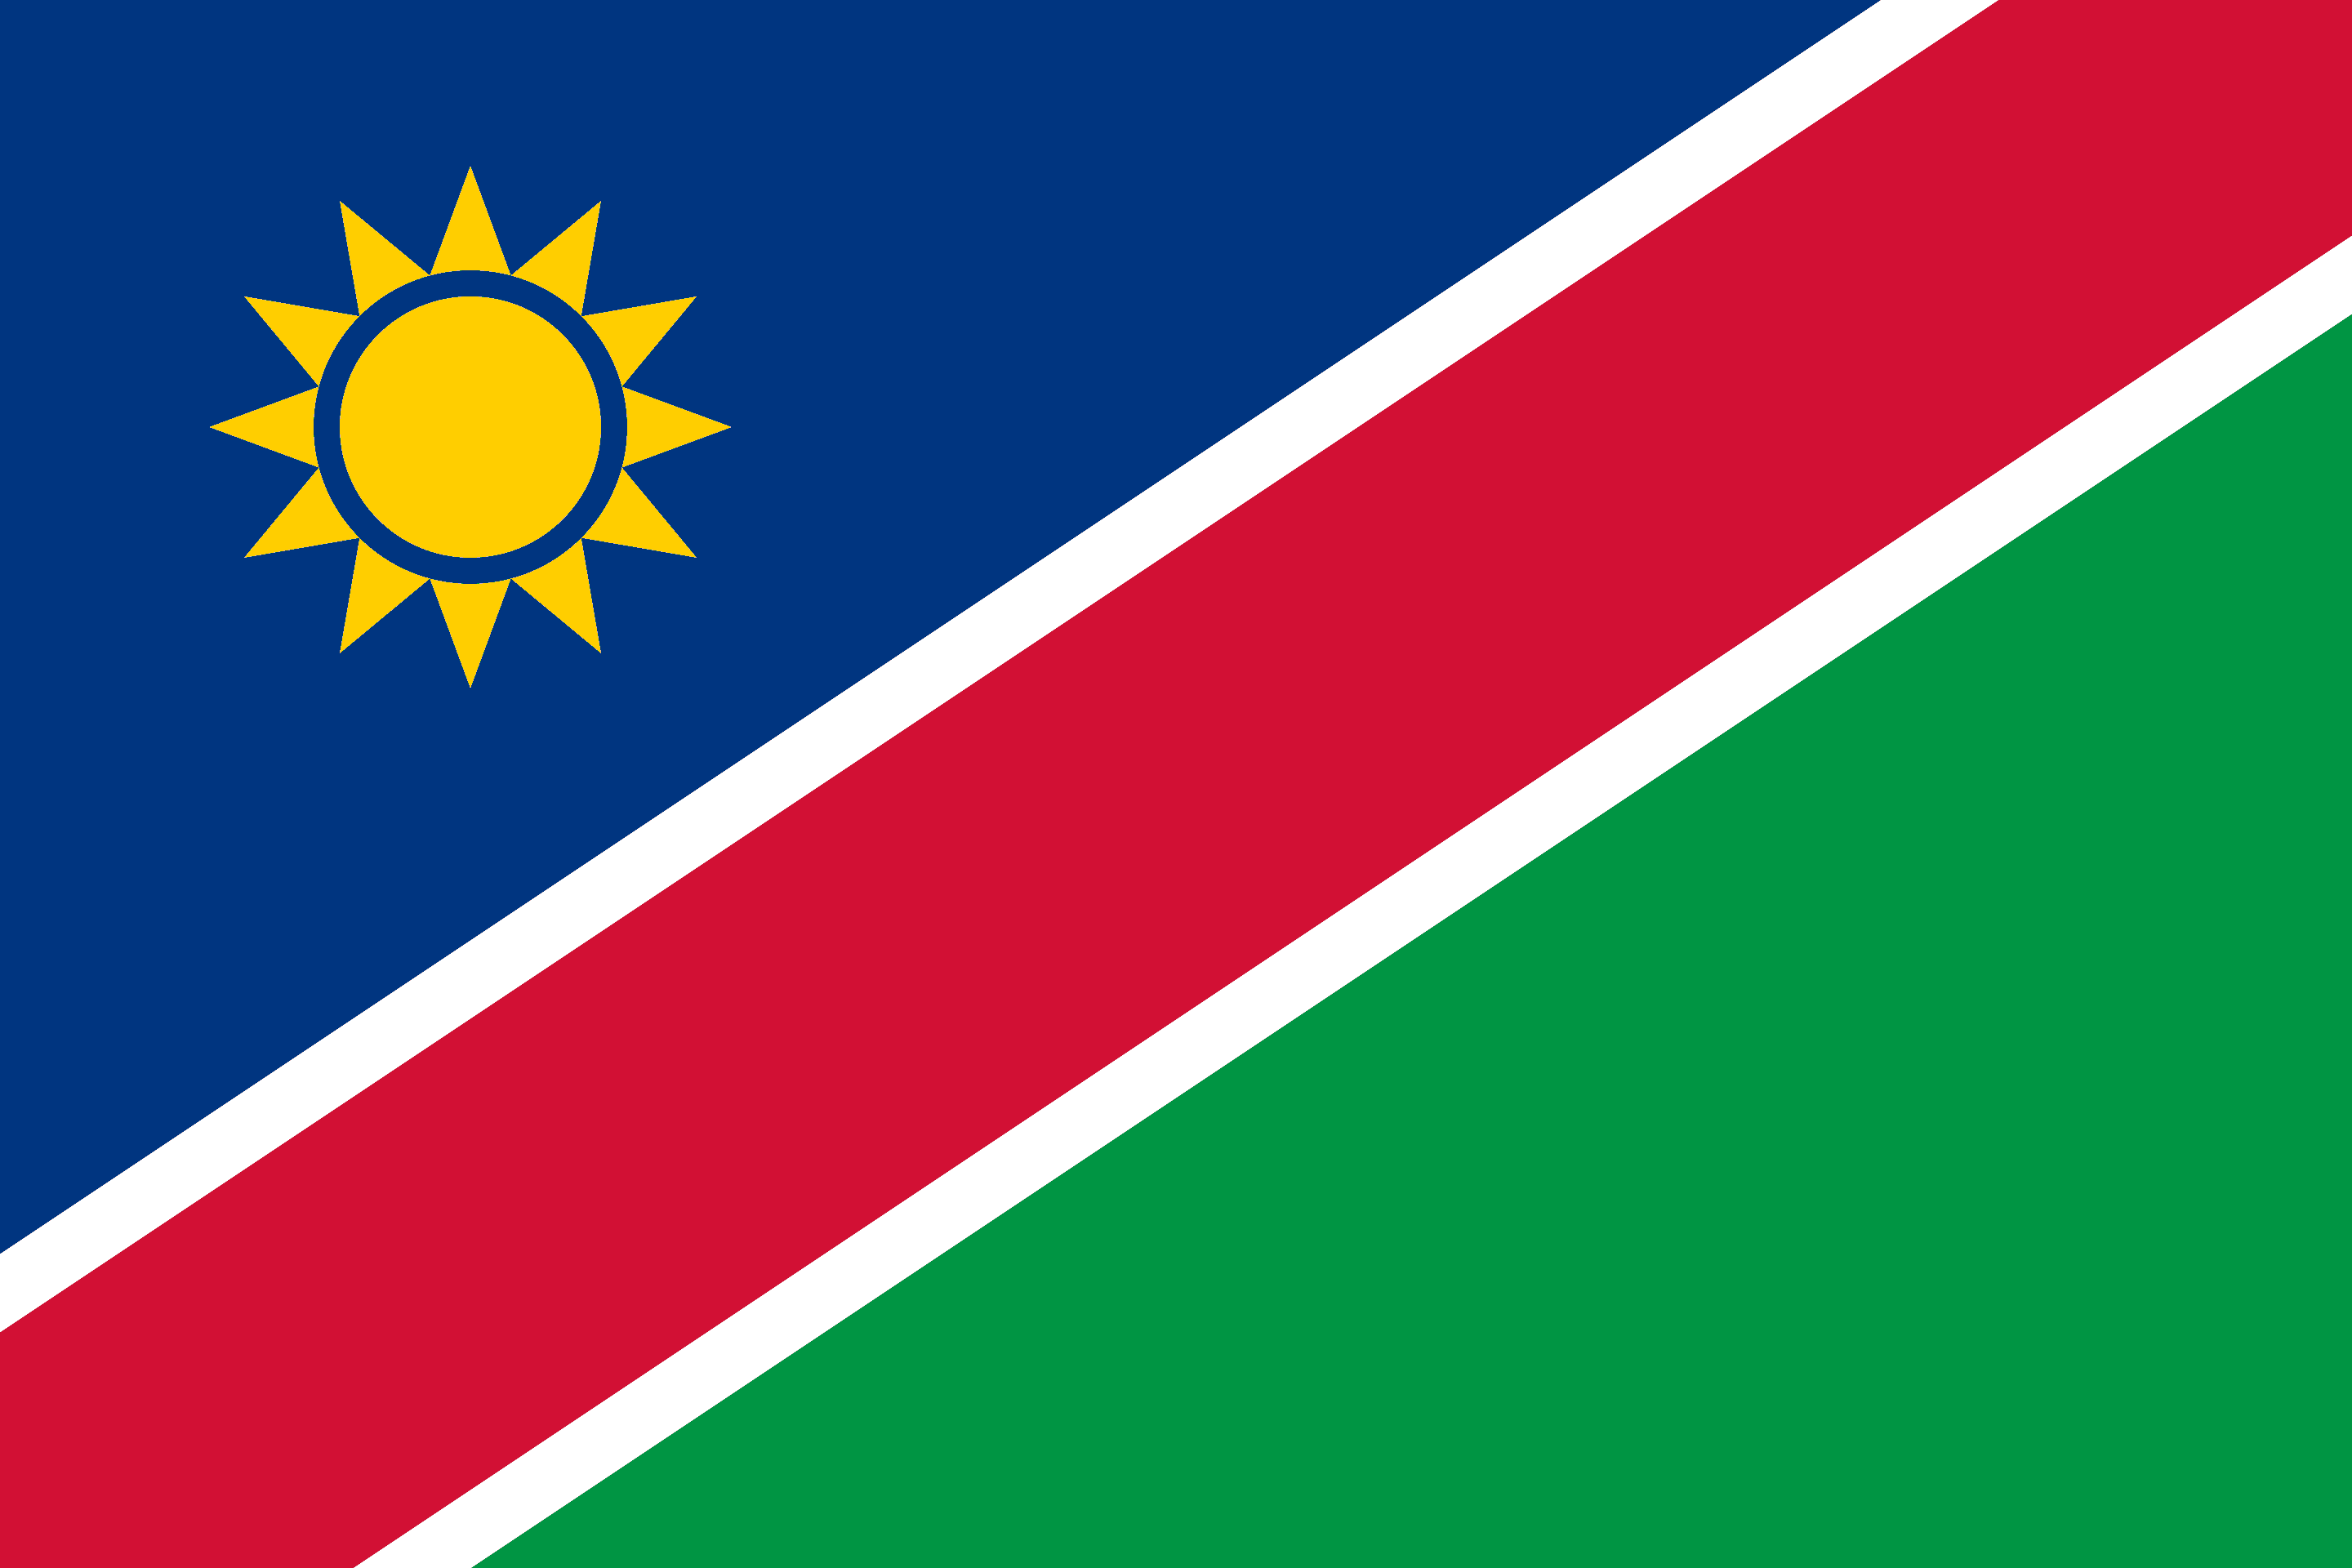 Drone Laws in Namibia